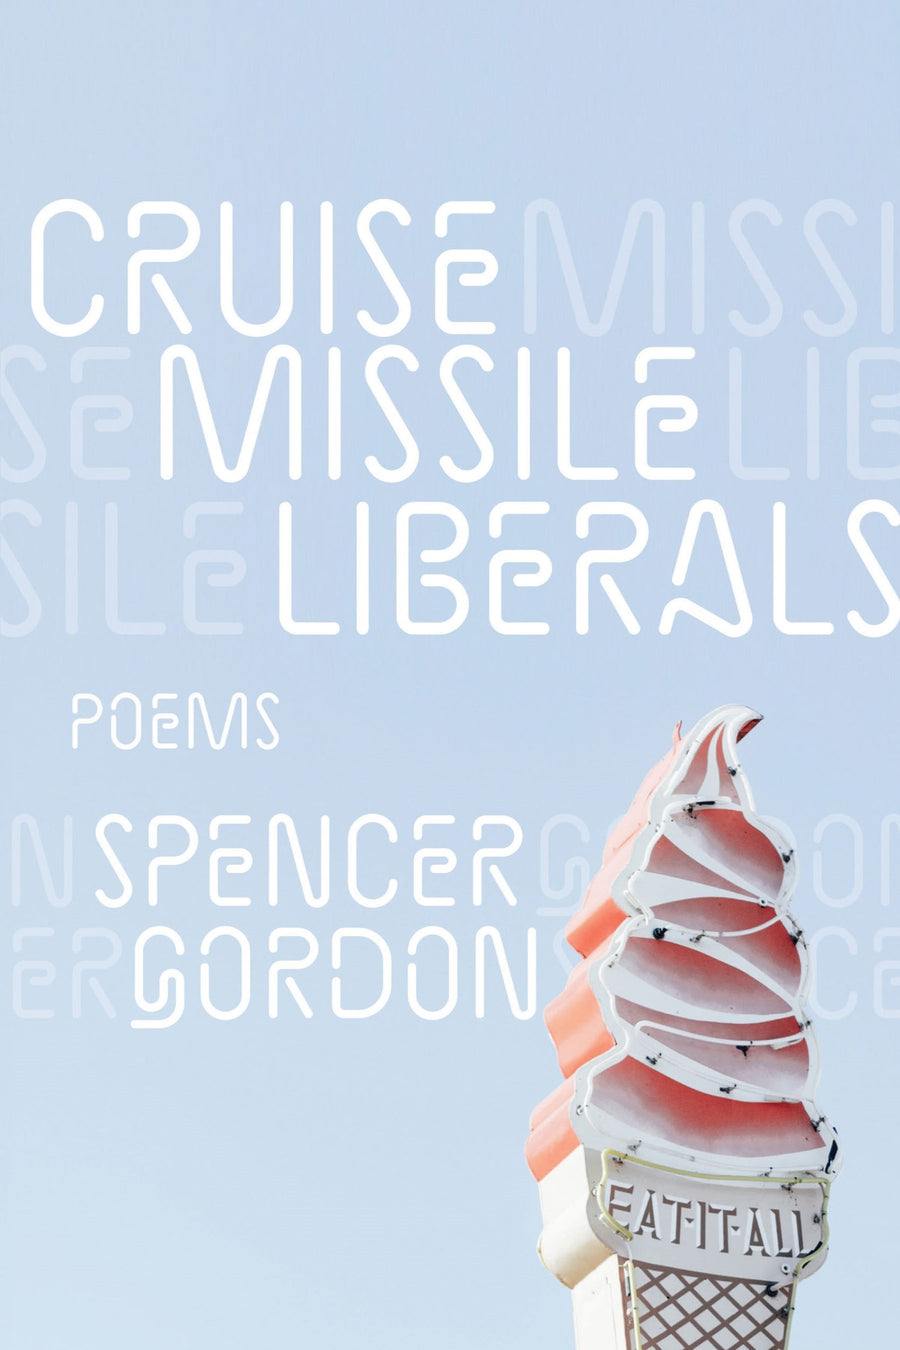 Cruise Missile Liberals